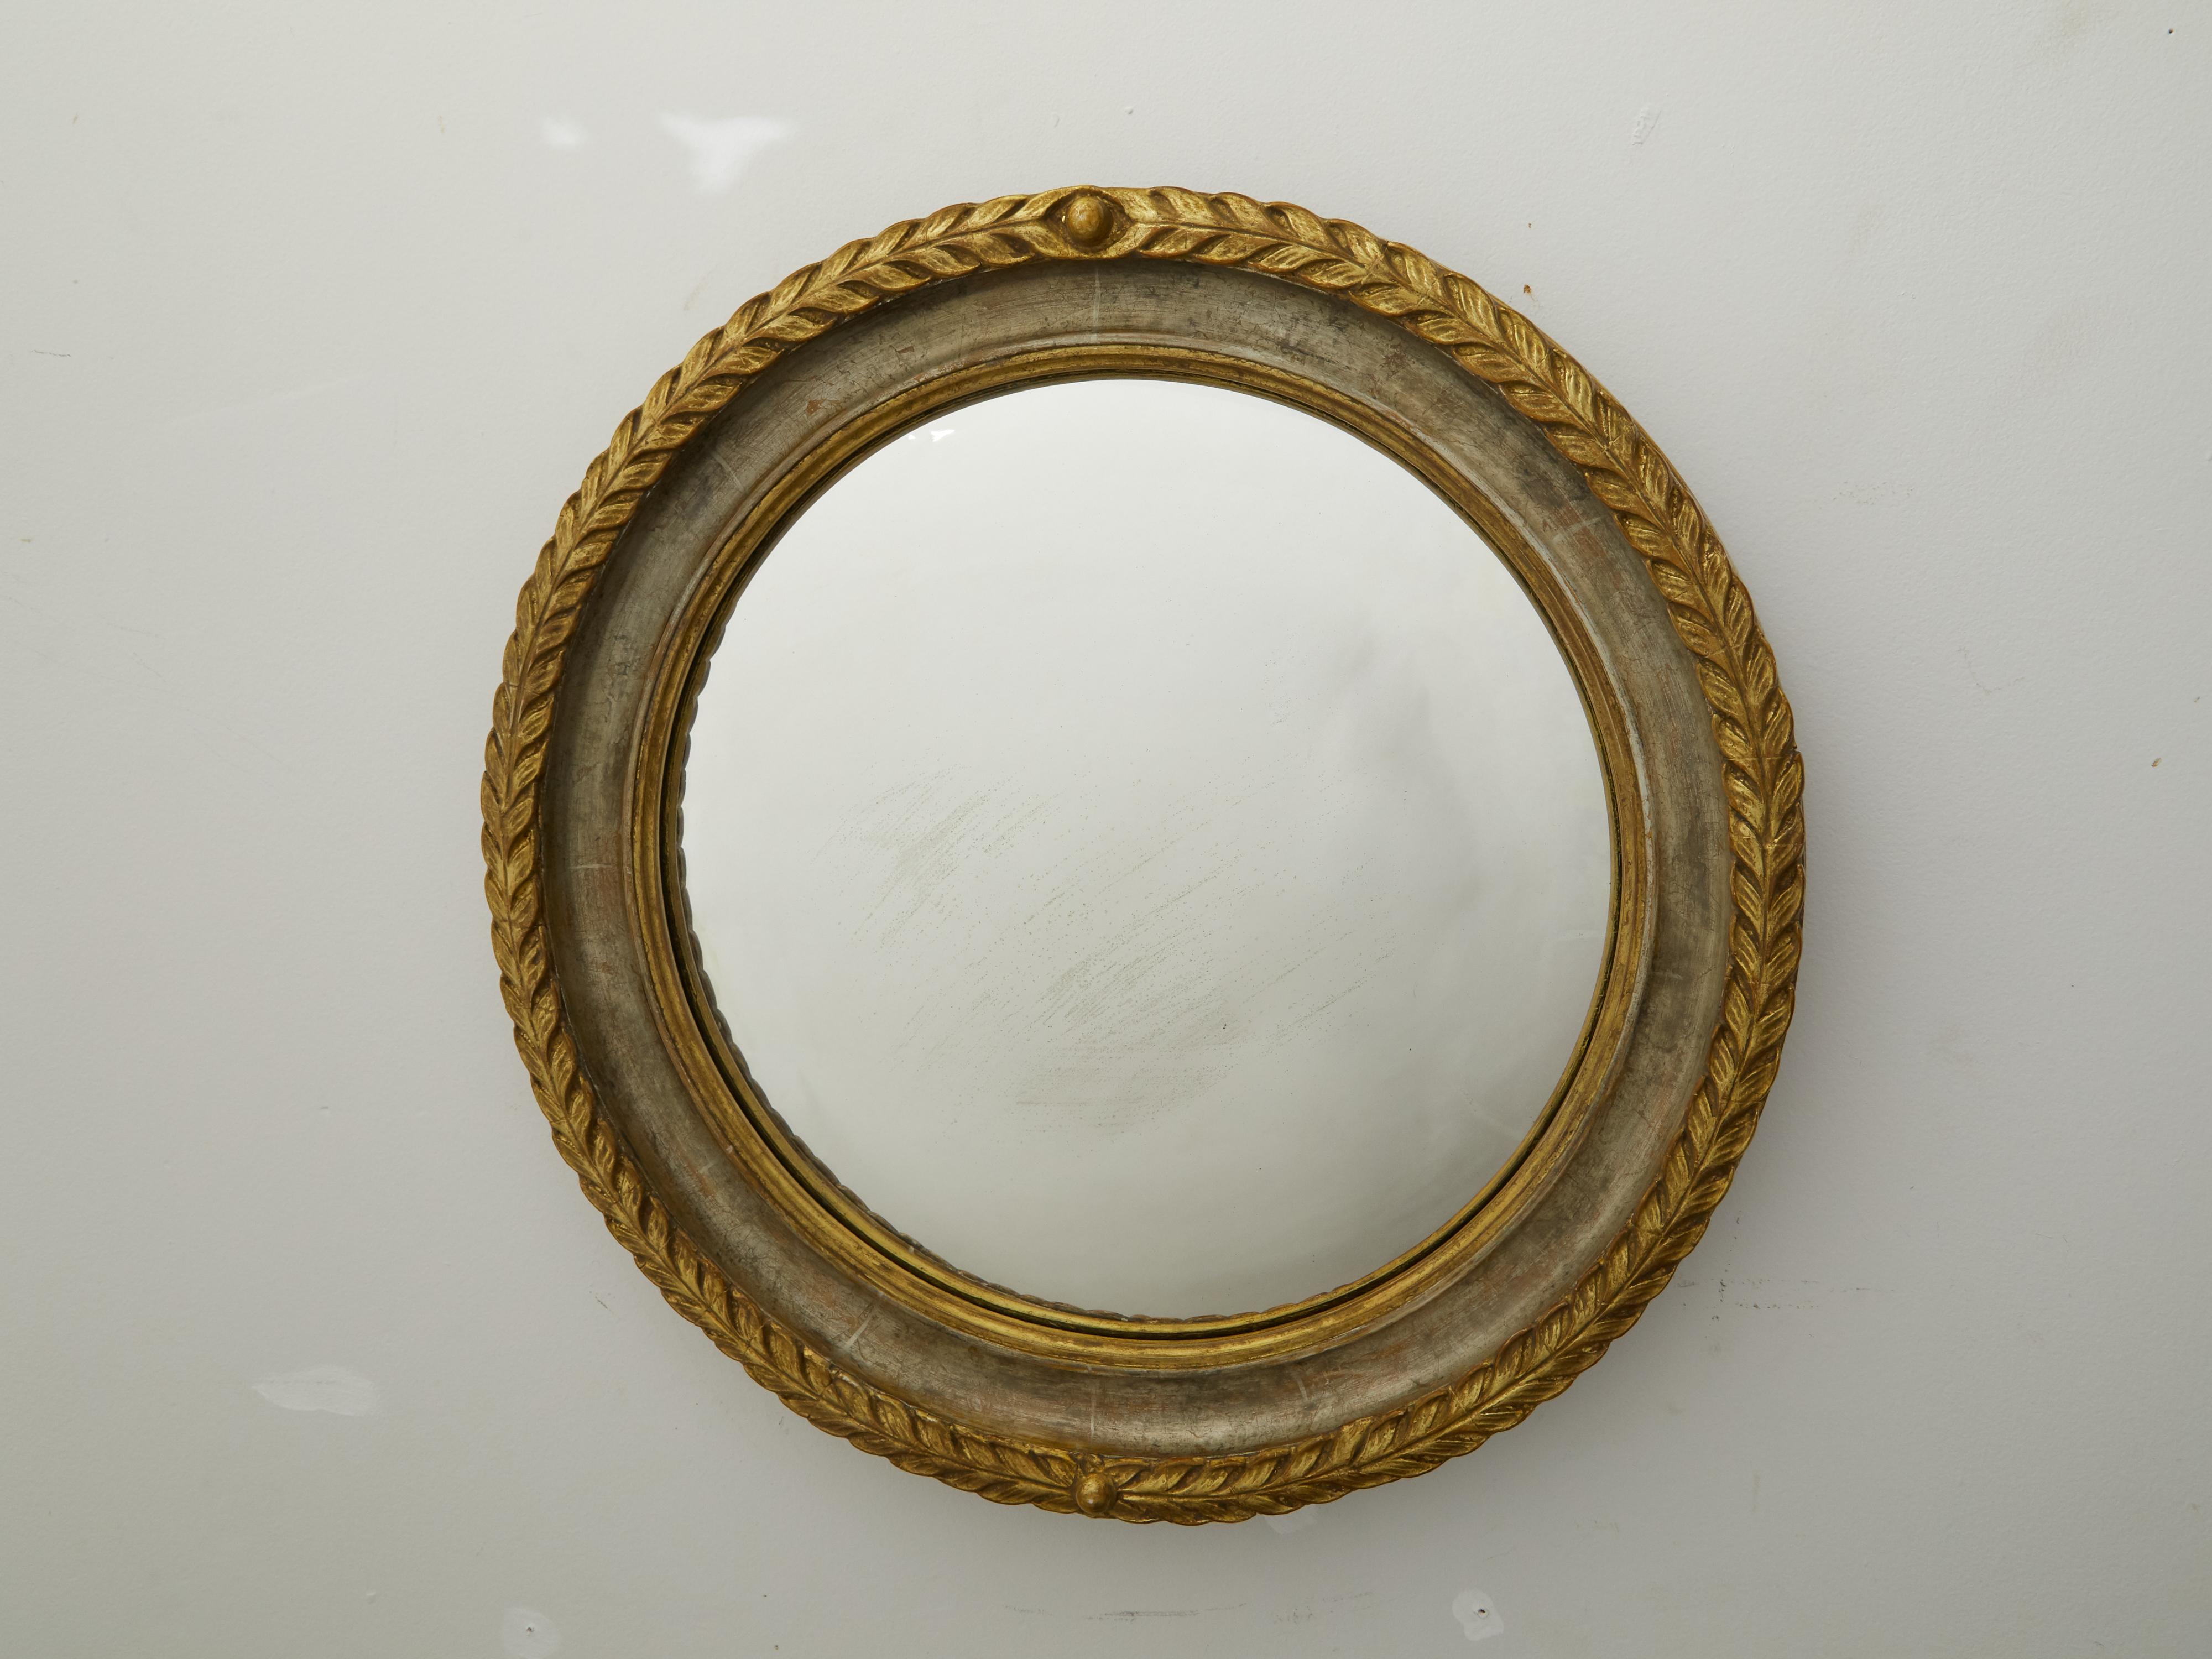 An English carved wooden circular mirror from the early 20th century, with foliage motifs and gilt accents. Created in England during the second quarter of the 20th century, this mirror features a round gilt frame adorned with foliage motifs on the